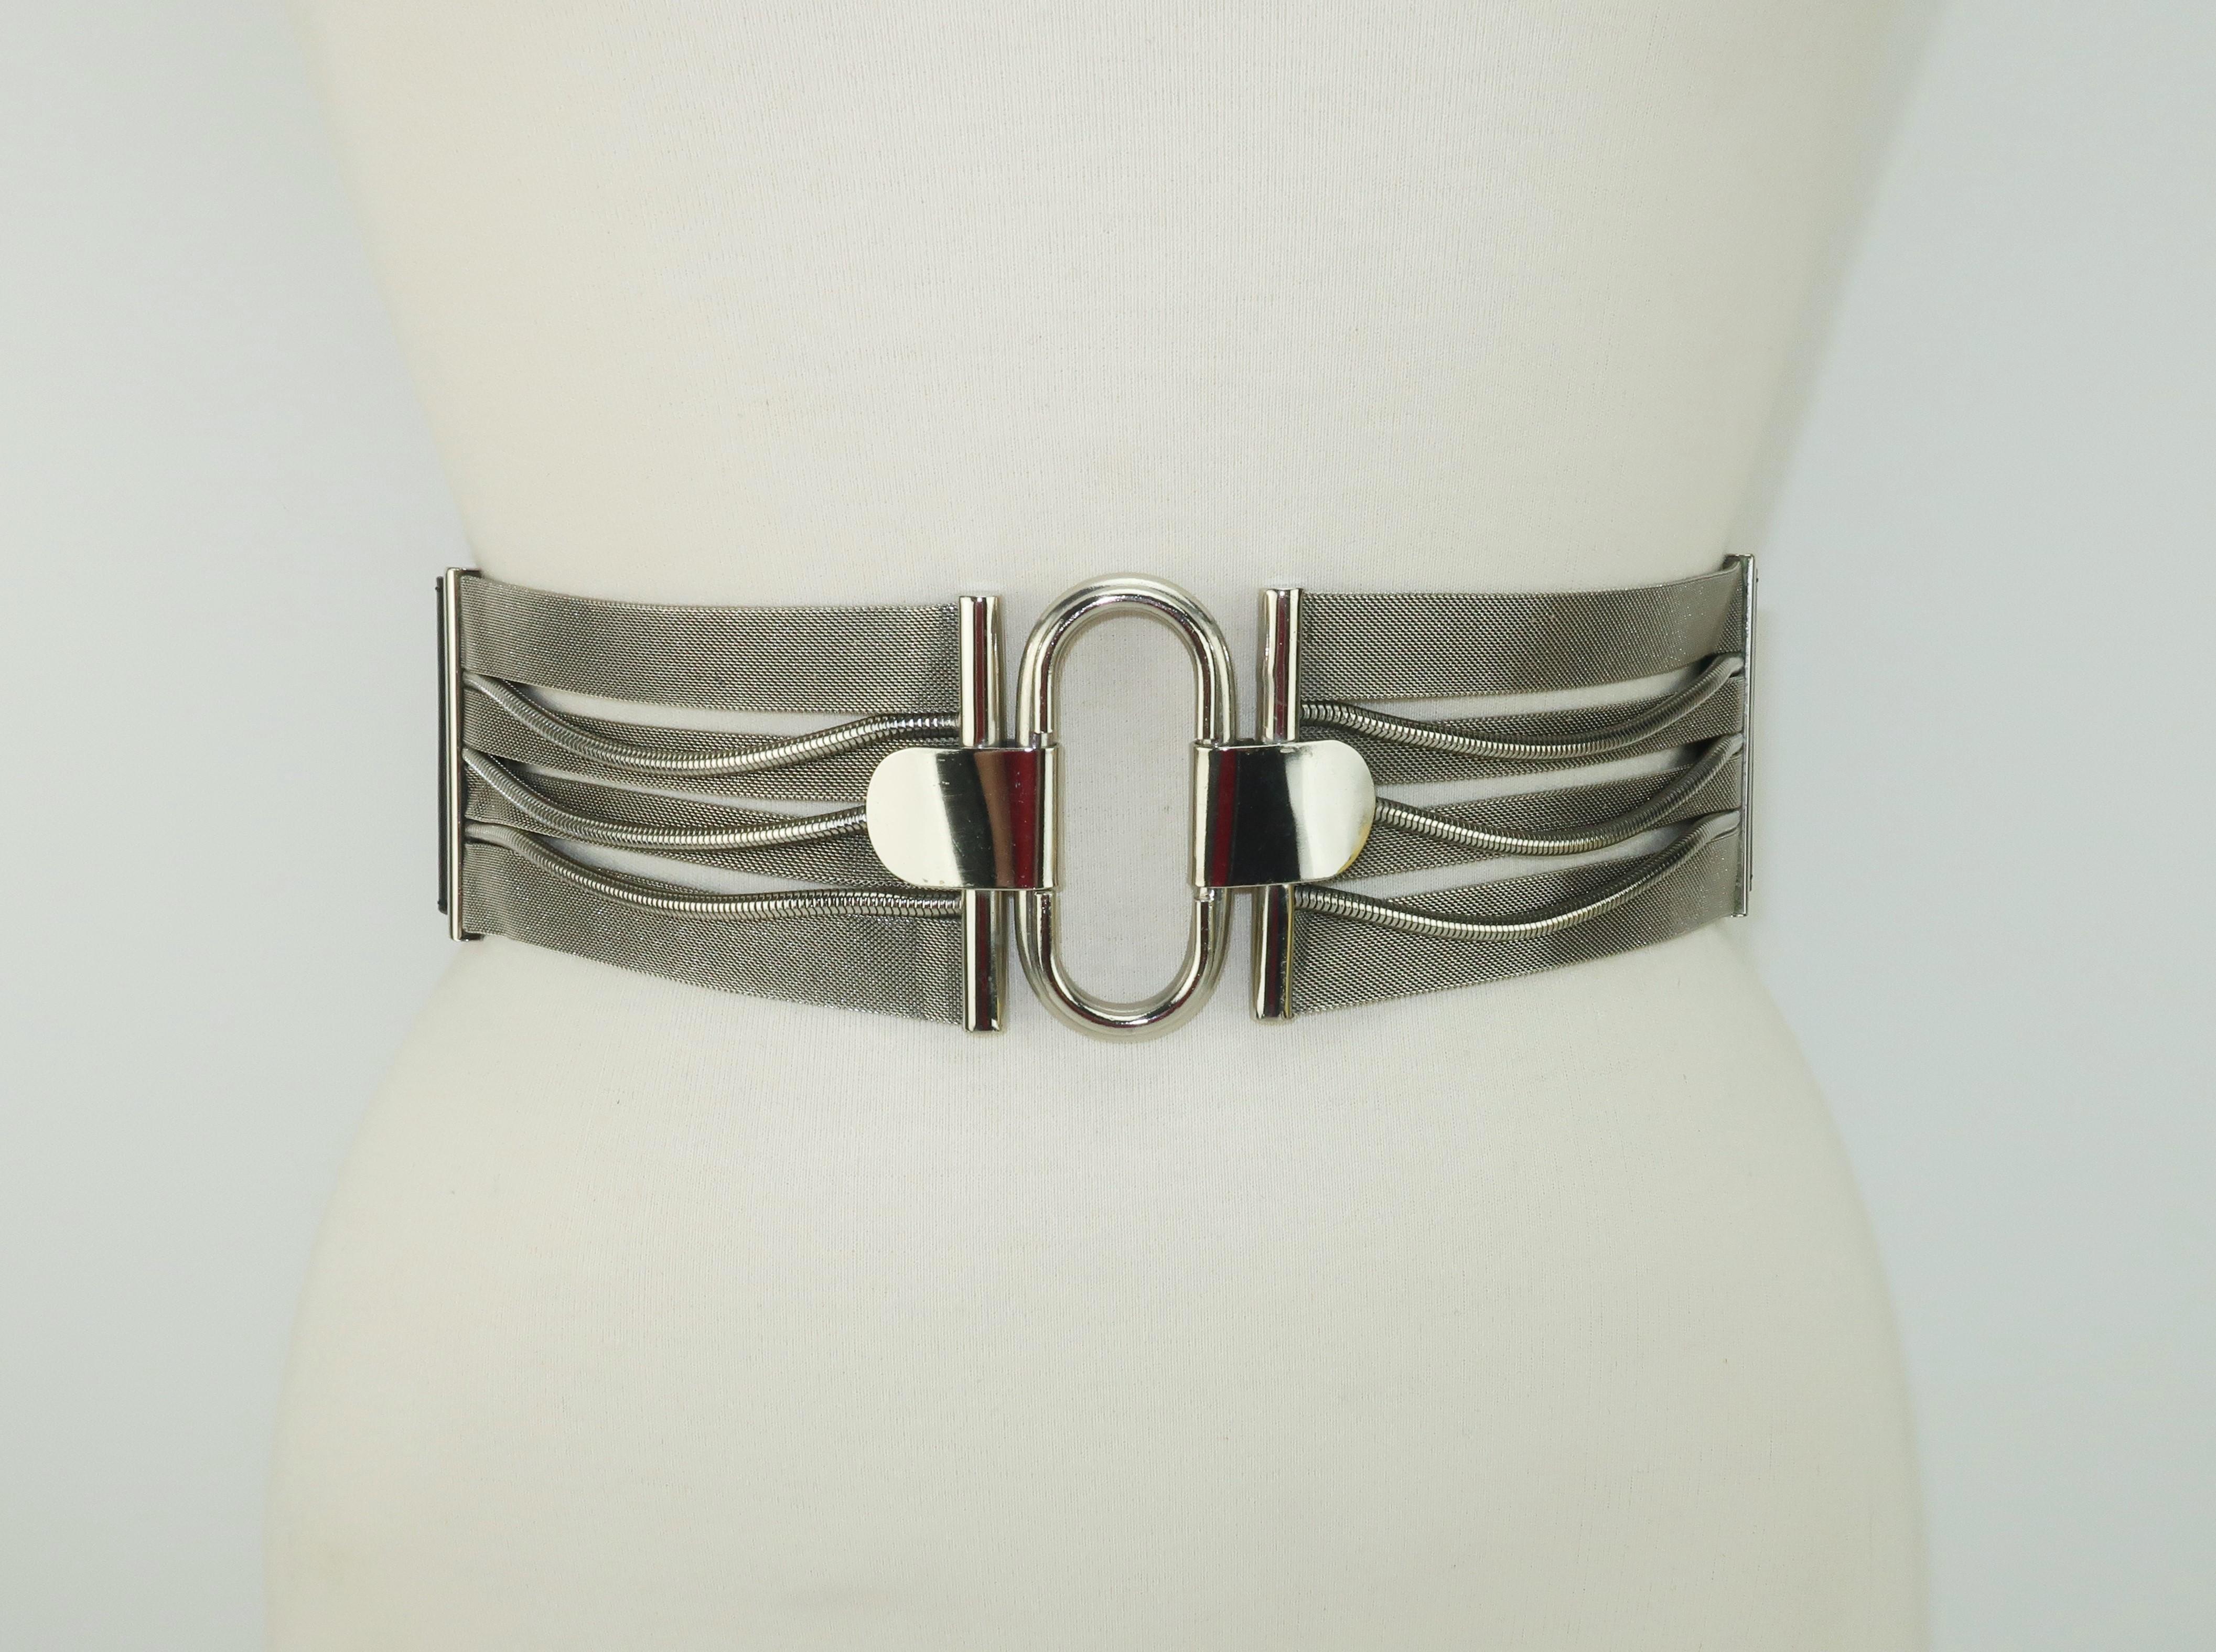 Italian jewelry designer, Ugo Correani, created this black leather belt for Genny in the late 1970's during Gianni Versace's tenure as fashion director. The belt incorporates silver mesh accented by a paperclip style centerpiece and serpentine